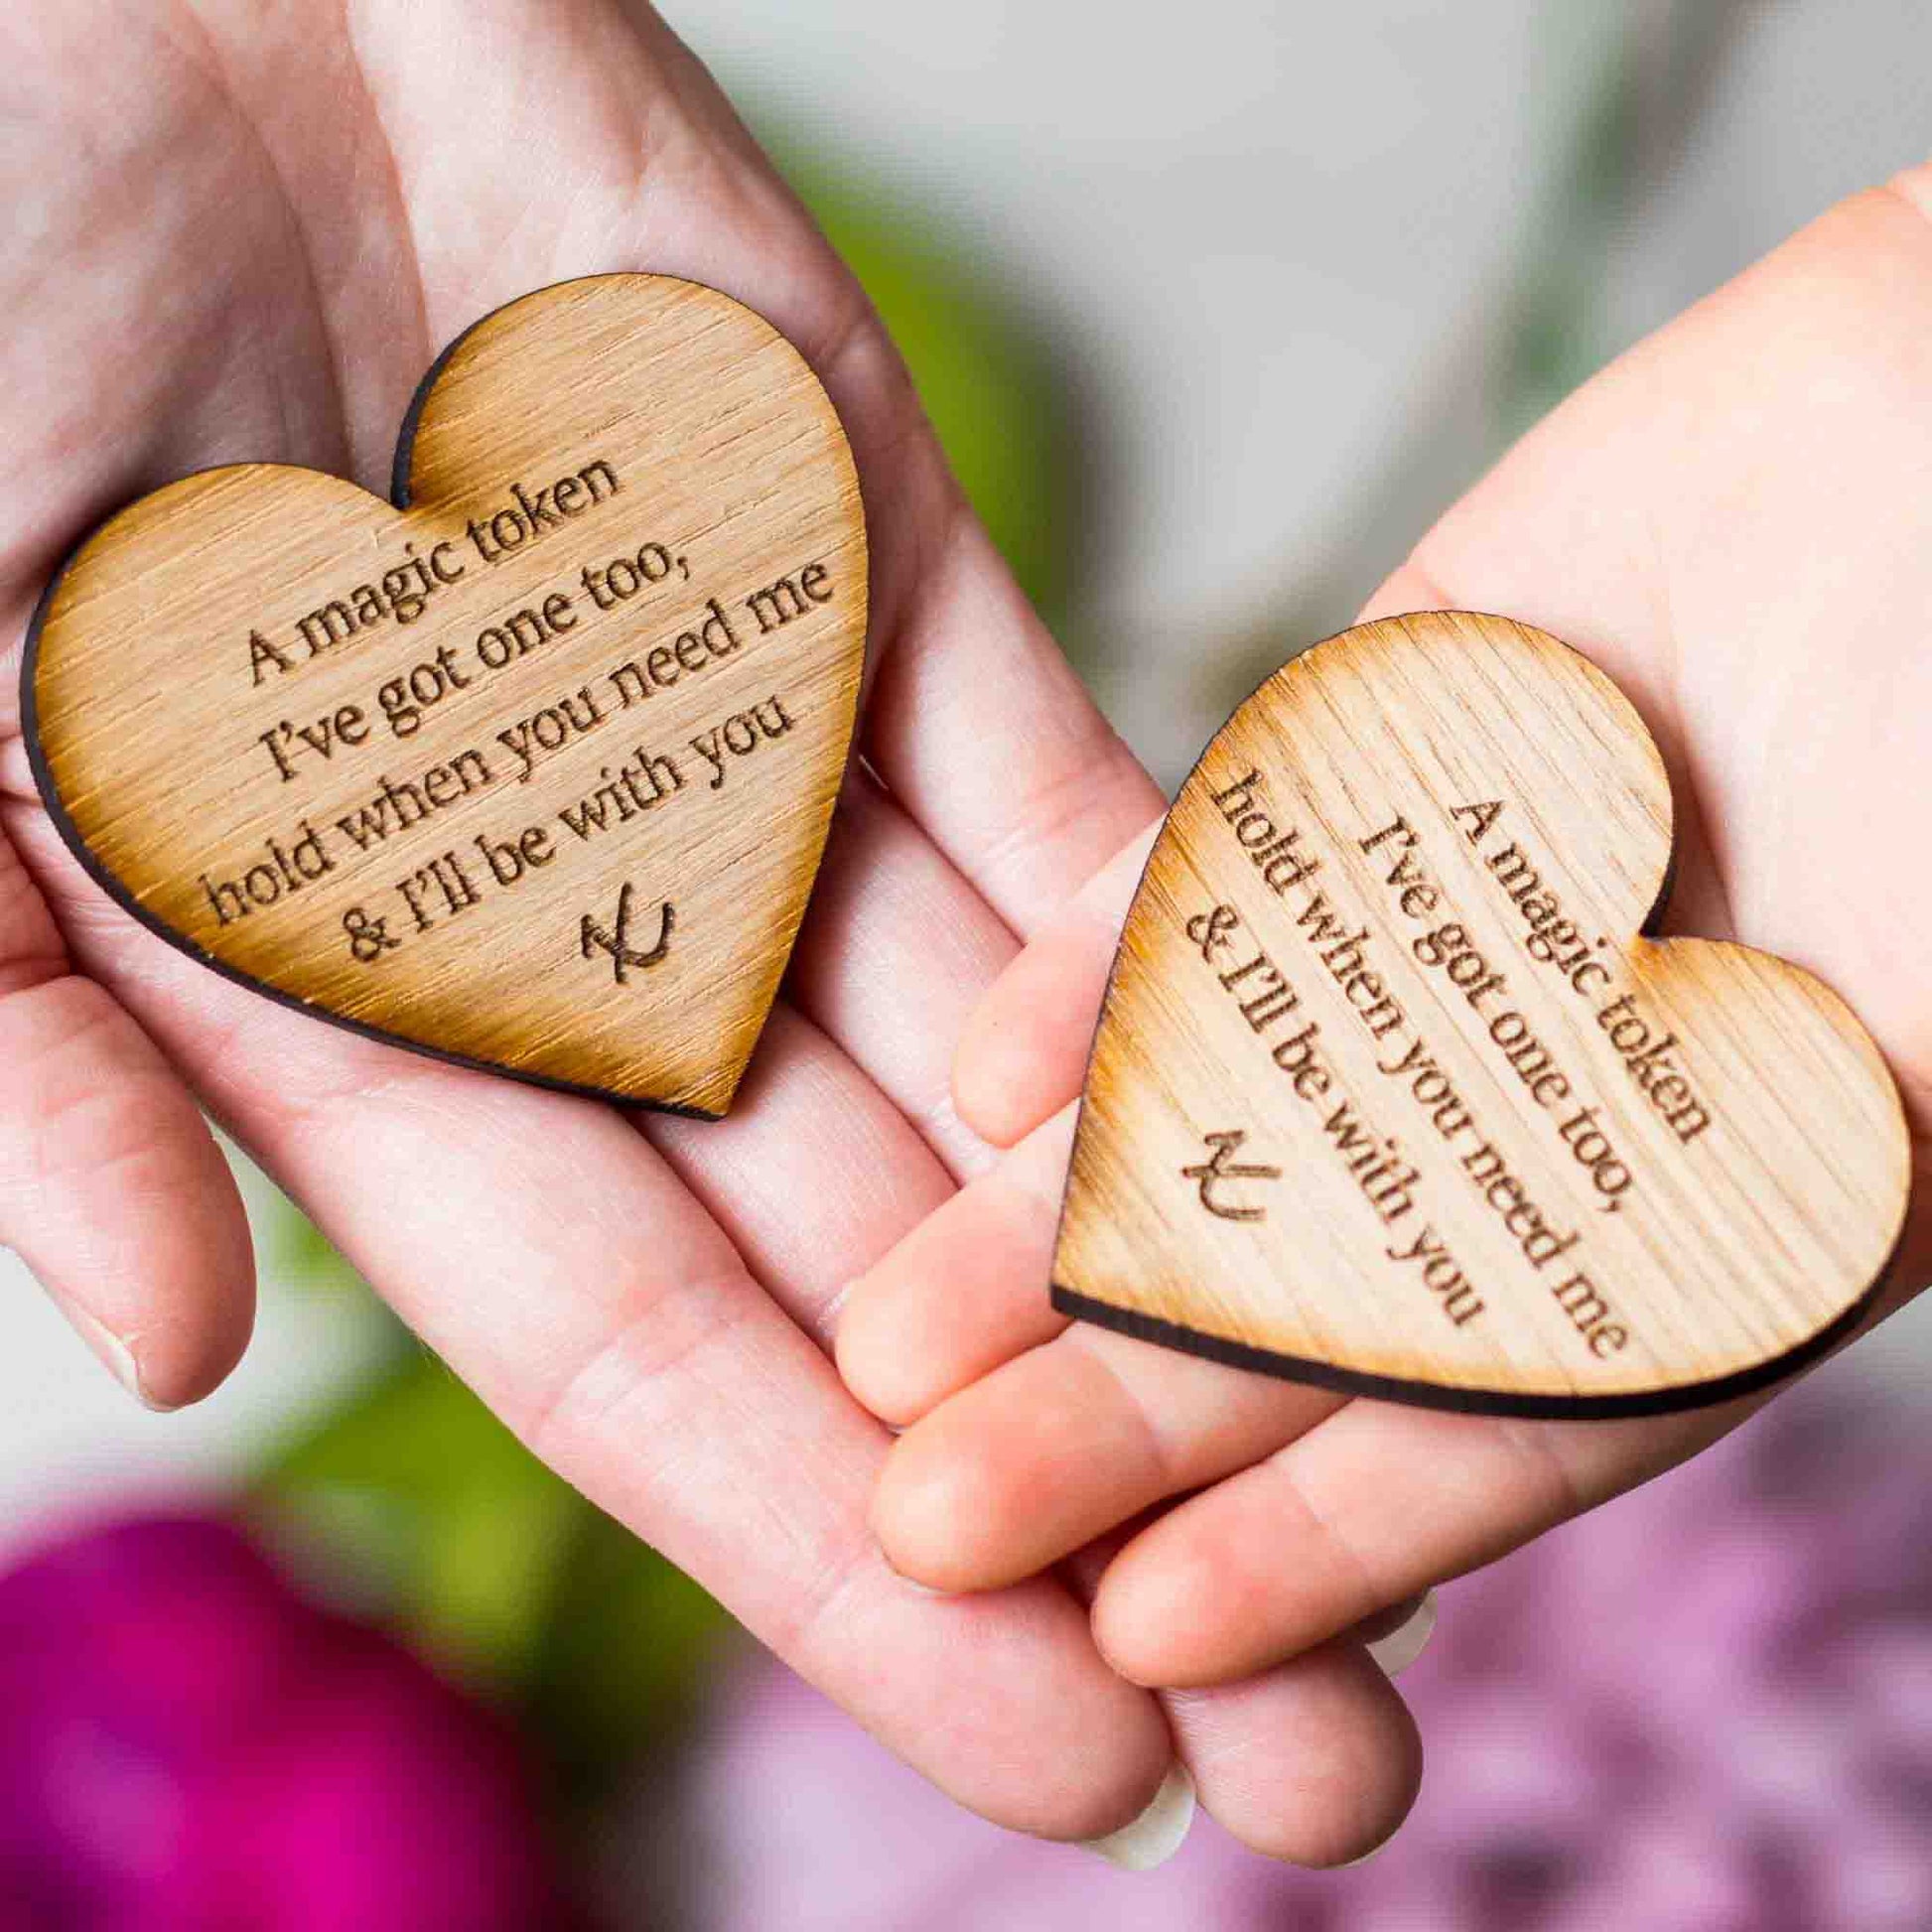 Wooden Little Pocket Hug Heart Tokens for Loved Ones in need of a Hug Gift  - Little Gifts With Love